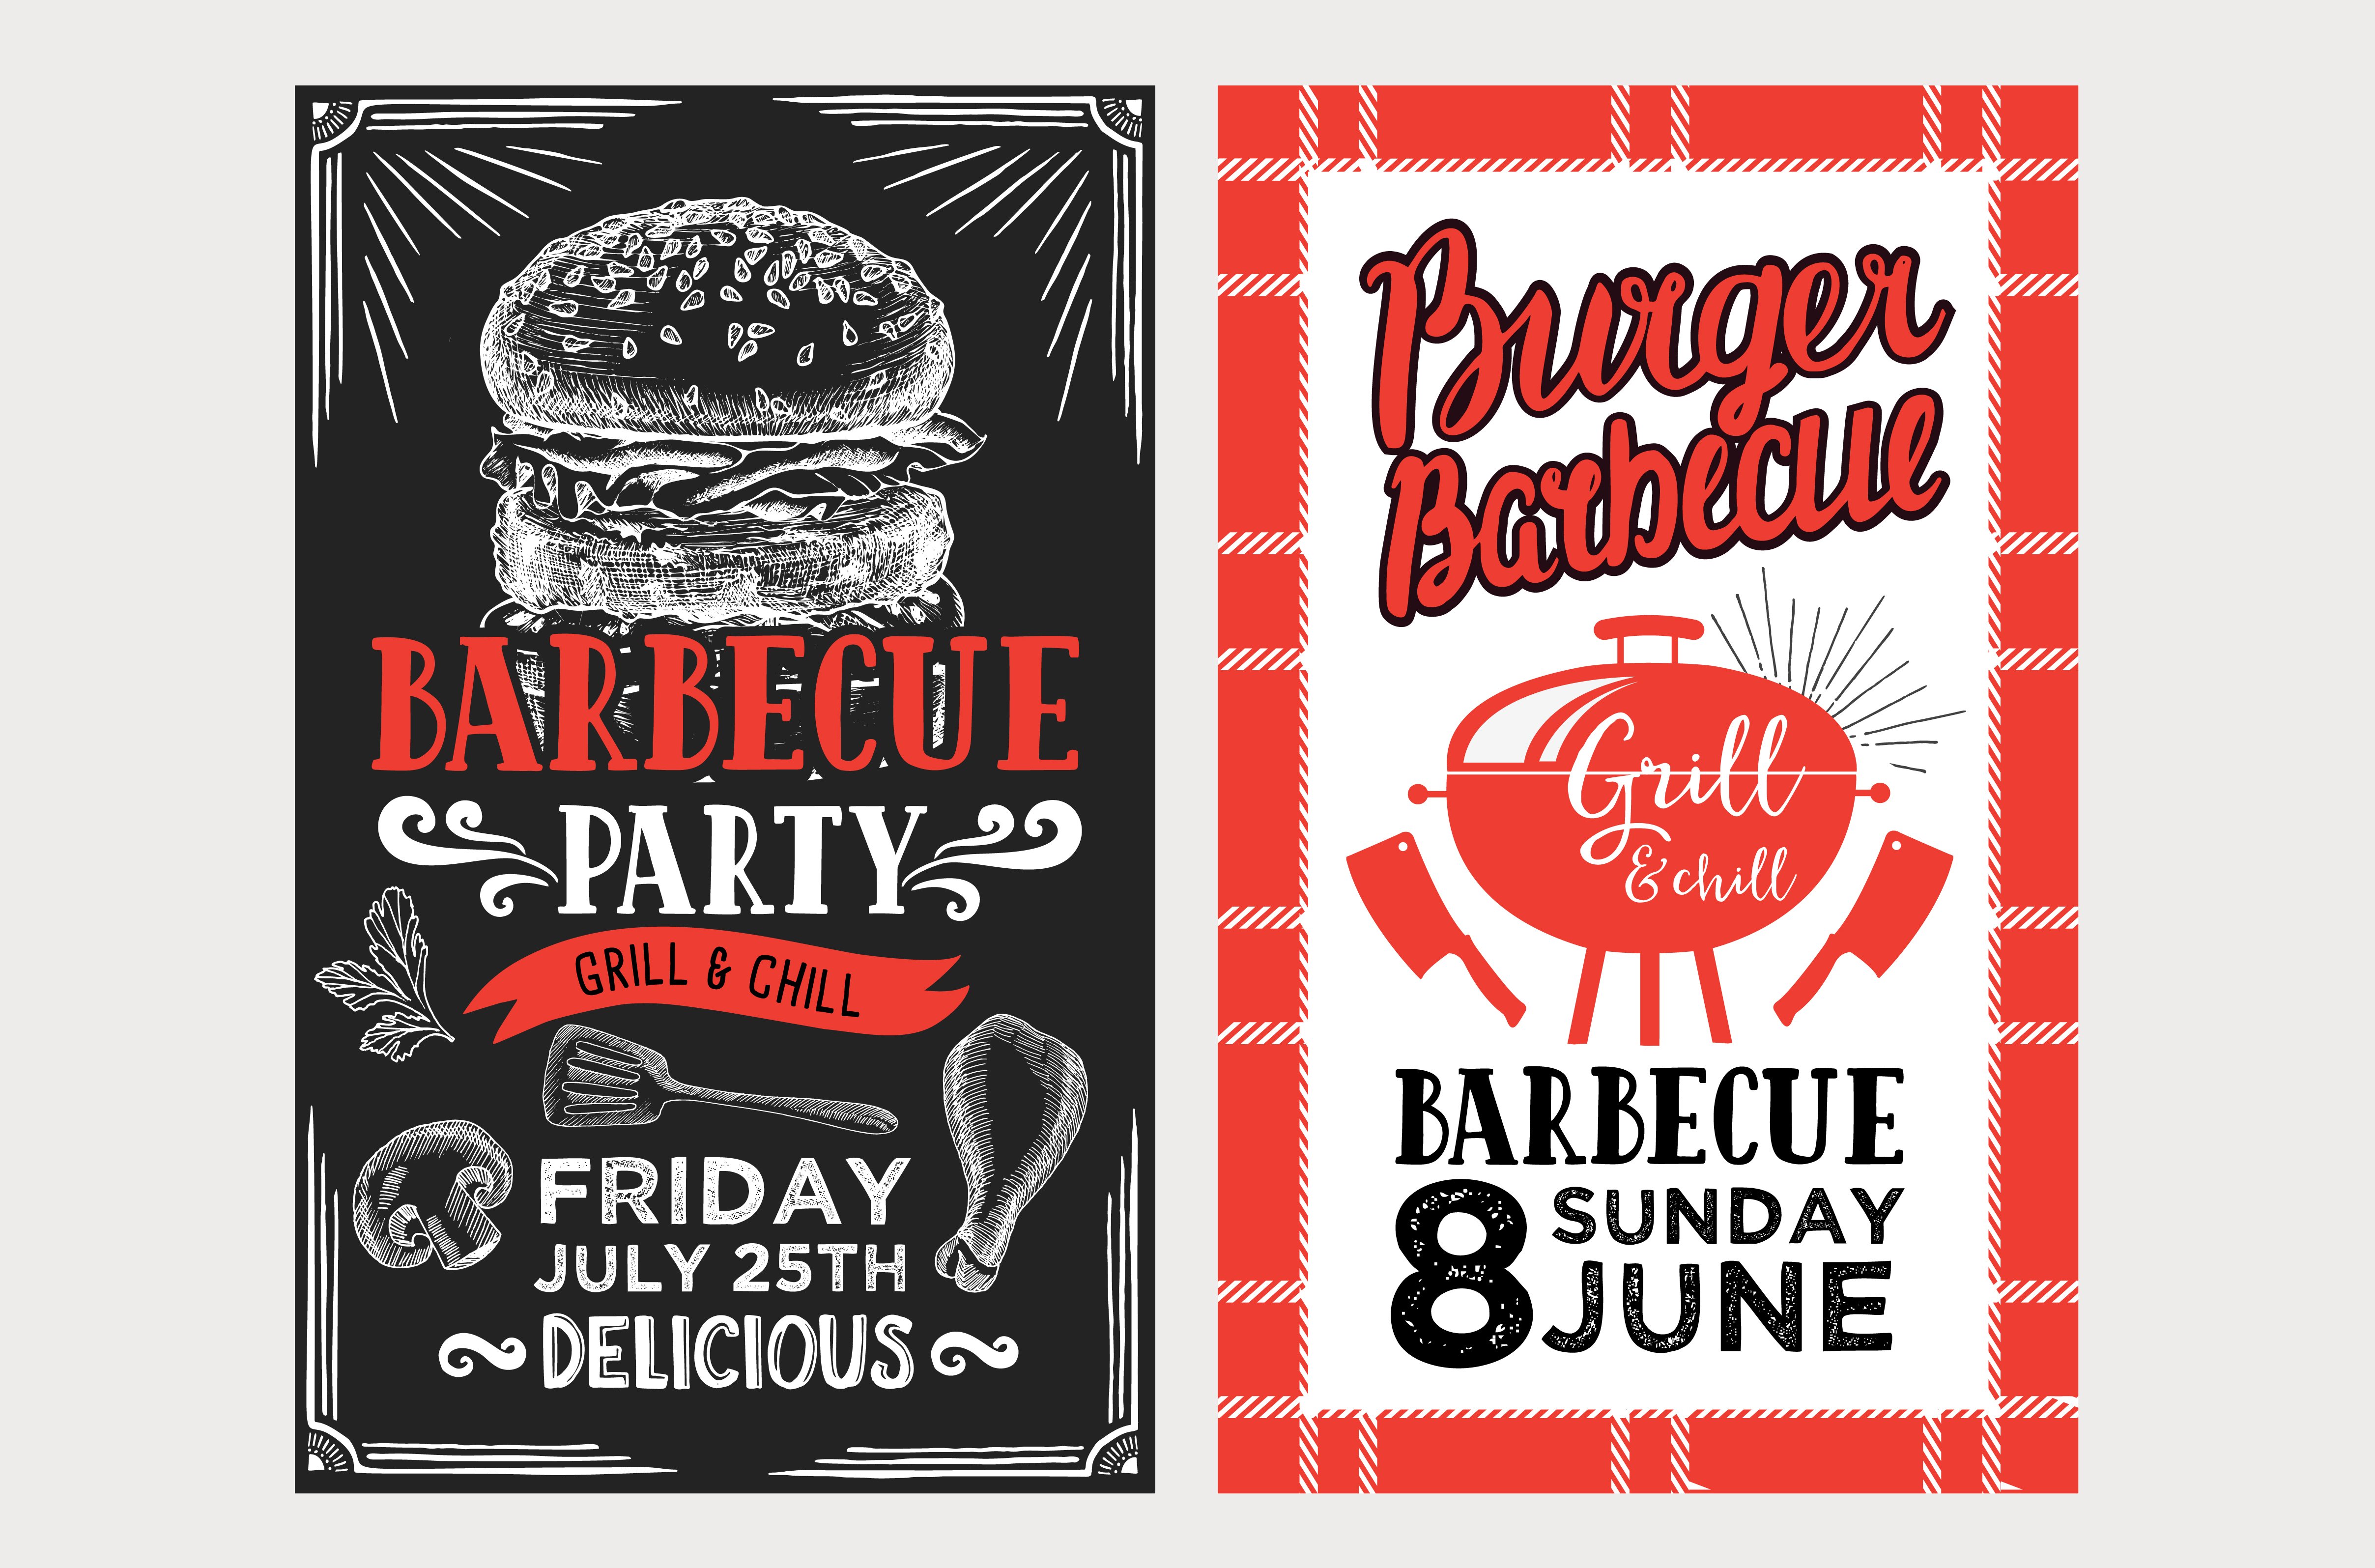 Barbecue menu templates, bbq party cover image.